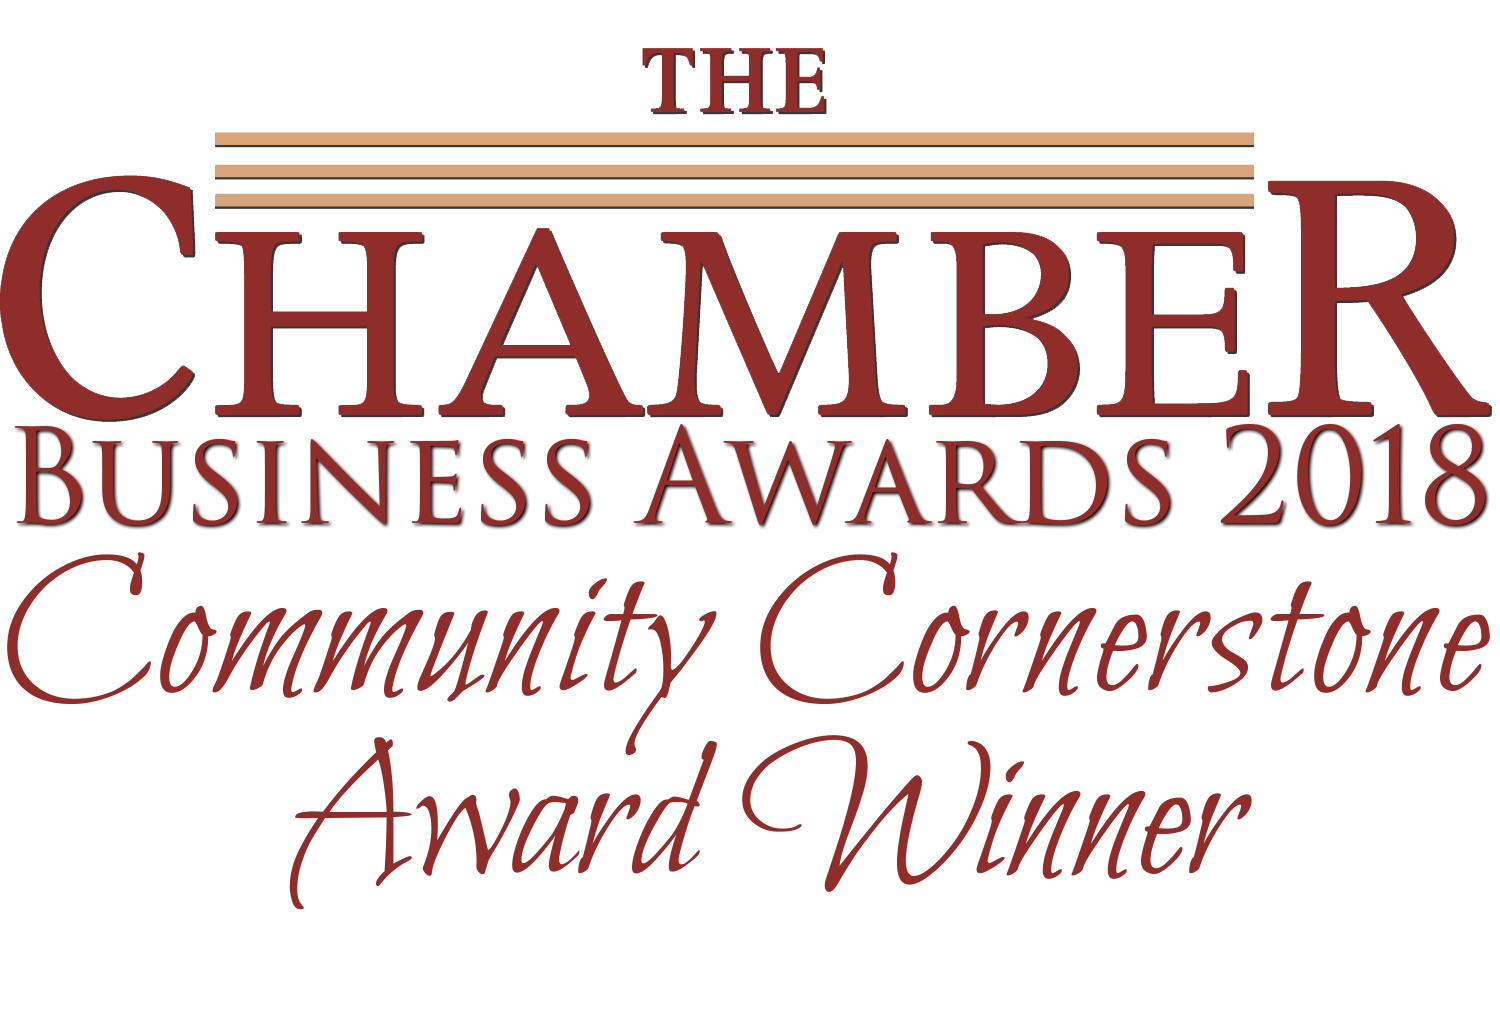 We won the 2018 Community Cornerstone Award. What an honor! The title was presented by the Superior Douglas Chamber of Commerce for our many years of service, community involvement, and commitment to providing our fellow neighbors and their pets with superior veterinary services. Our practice has served the local community since 1979, and there is nowhere else we’d rather call home.